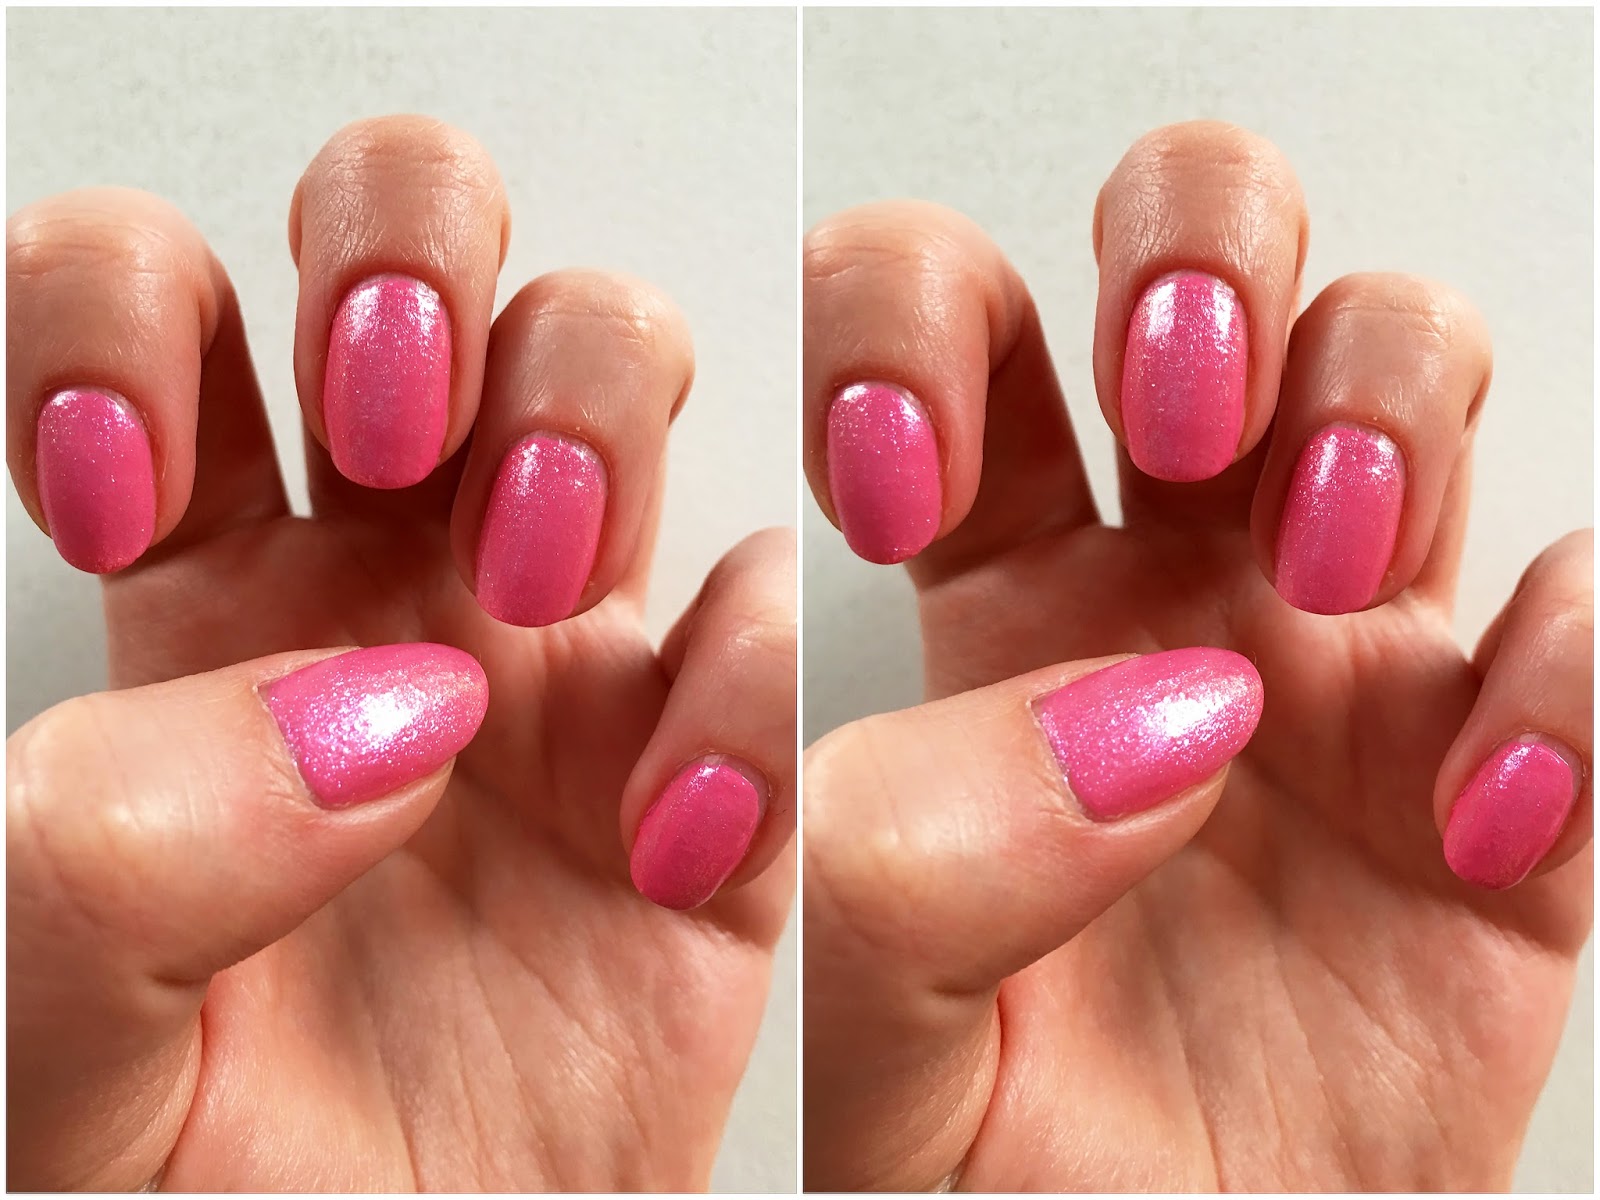 6. Holographic Pink and White Nails - wide 7